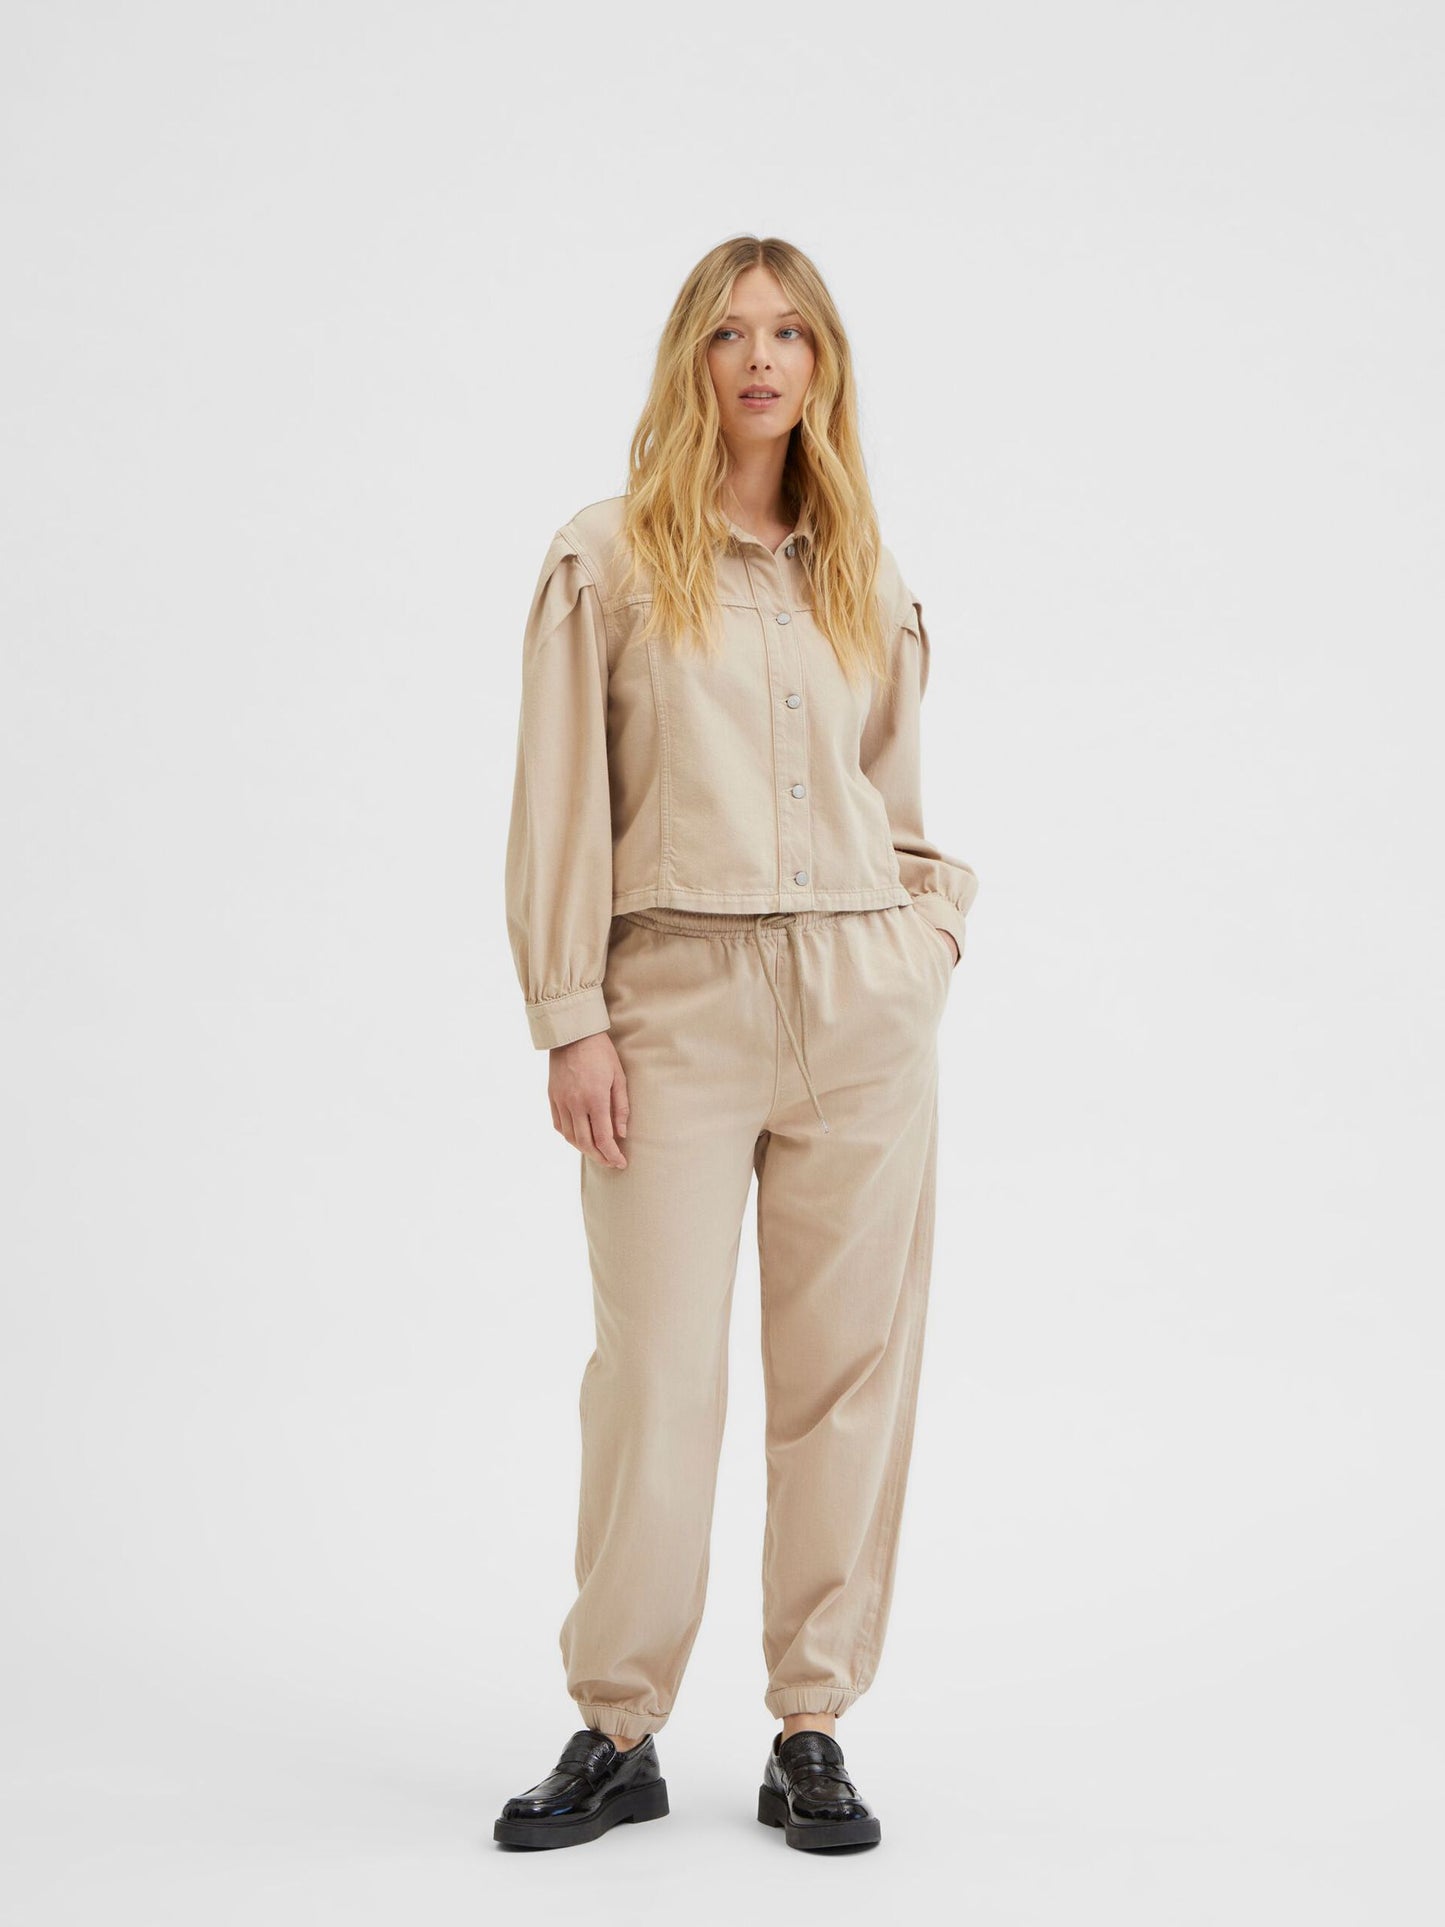 Nomad Denim Trousers - Selected Femme